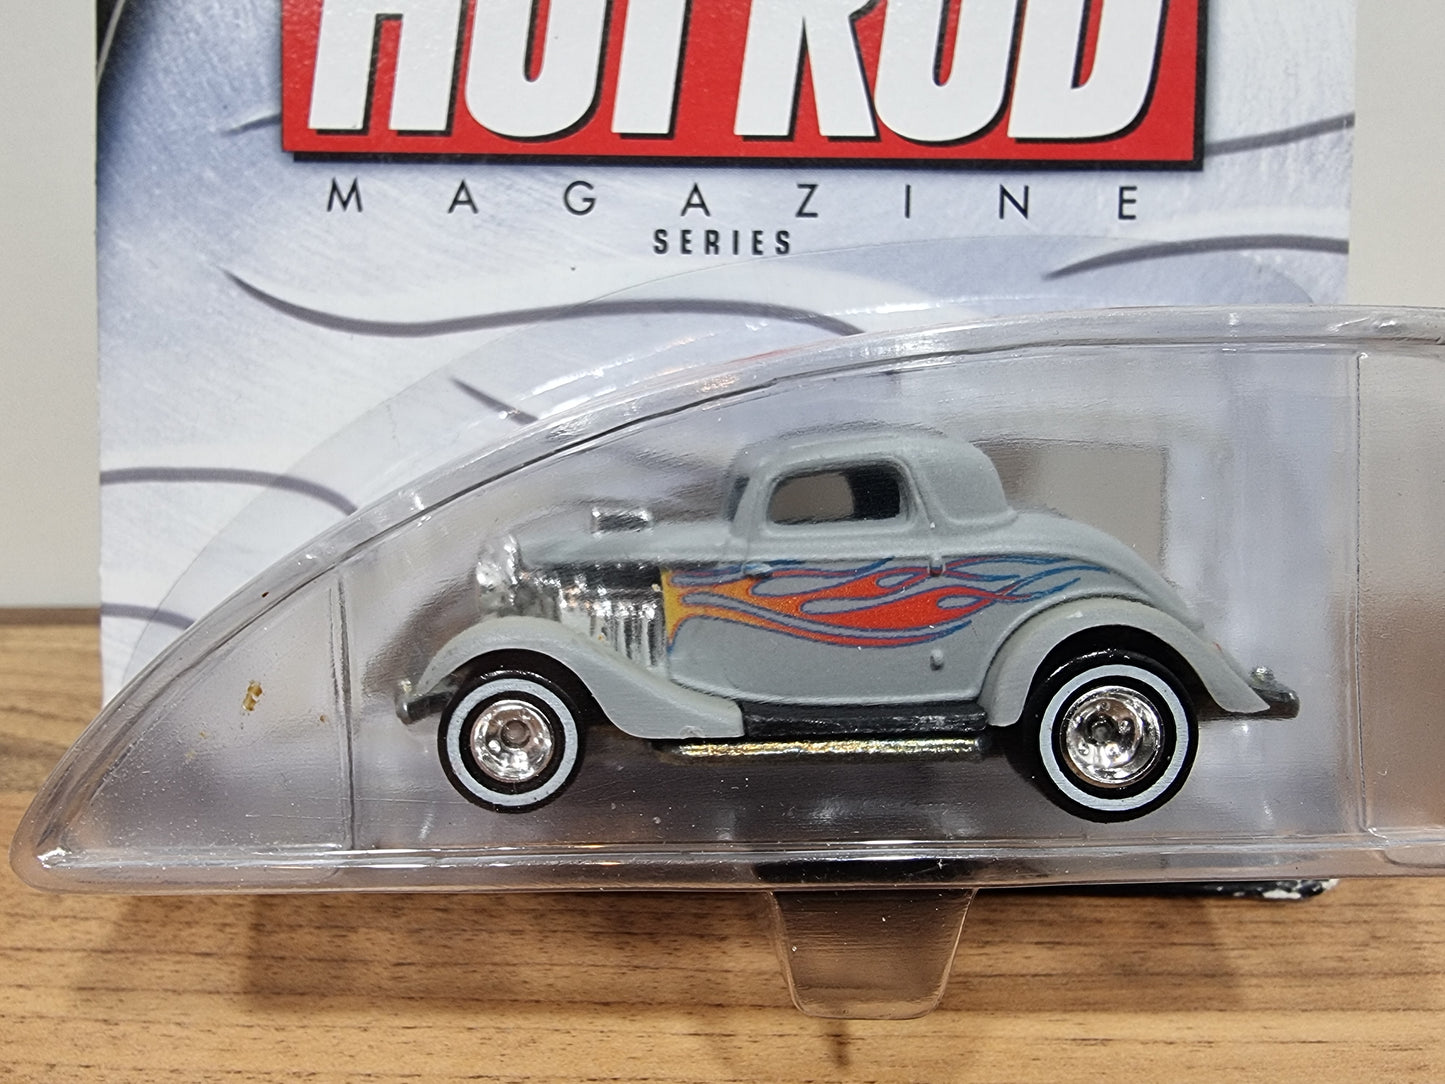 Hot Wheels '34 Ford Coupe